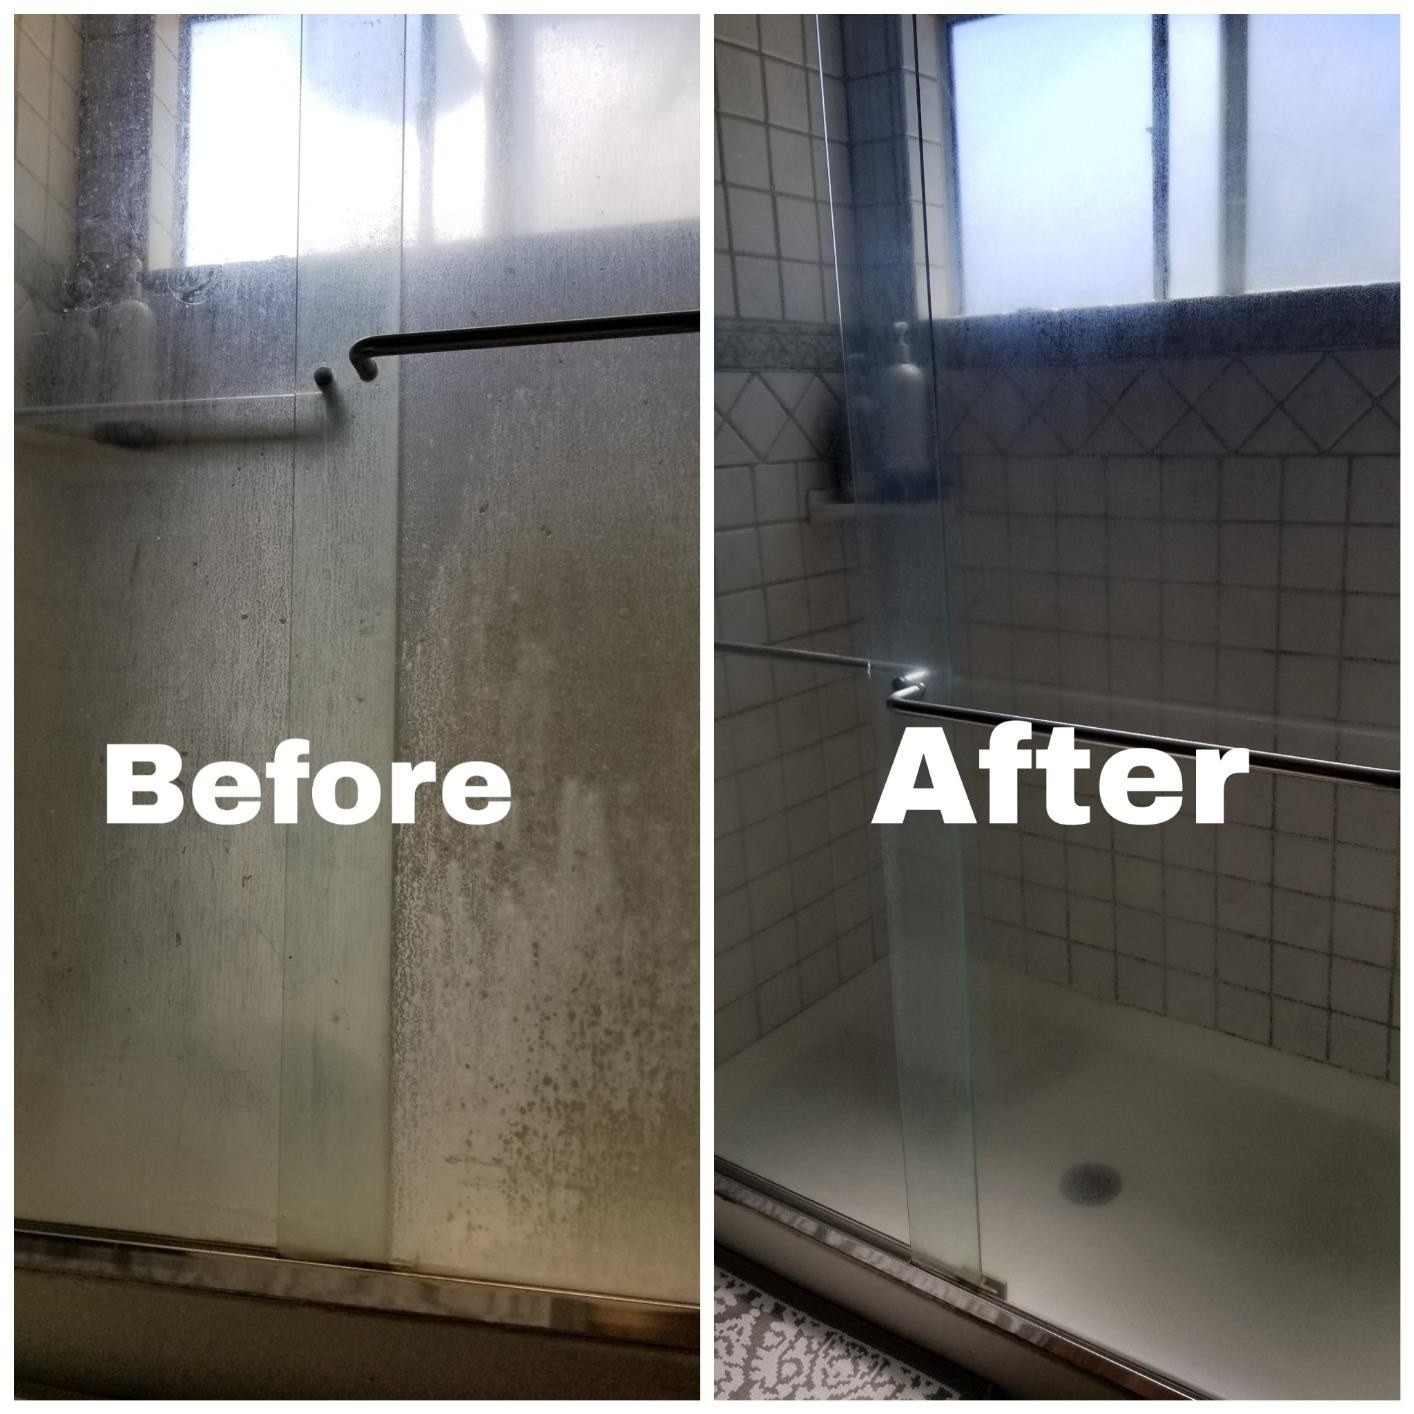 Reviewer photo of a shower door with residue streaks on the left and the same shower door looking clean and residue-free on the right